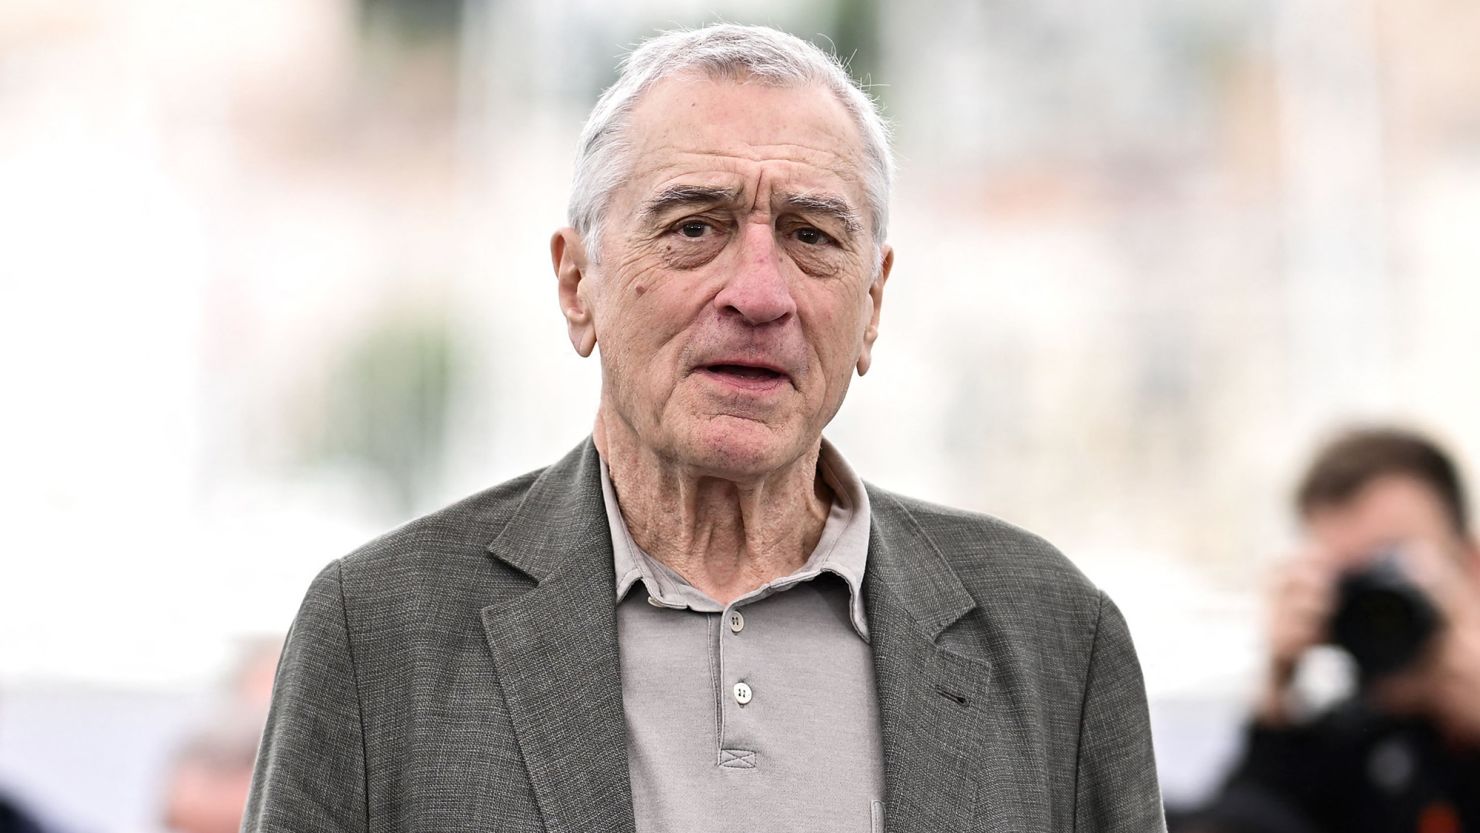 Robert De Niro, a two-time Oscar winner, has been nominated for best actor in a supporting role at the upcoming 2024 Academy Awards.